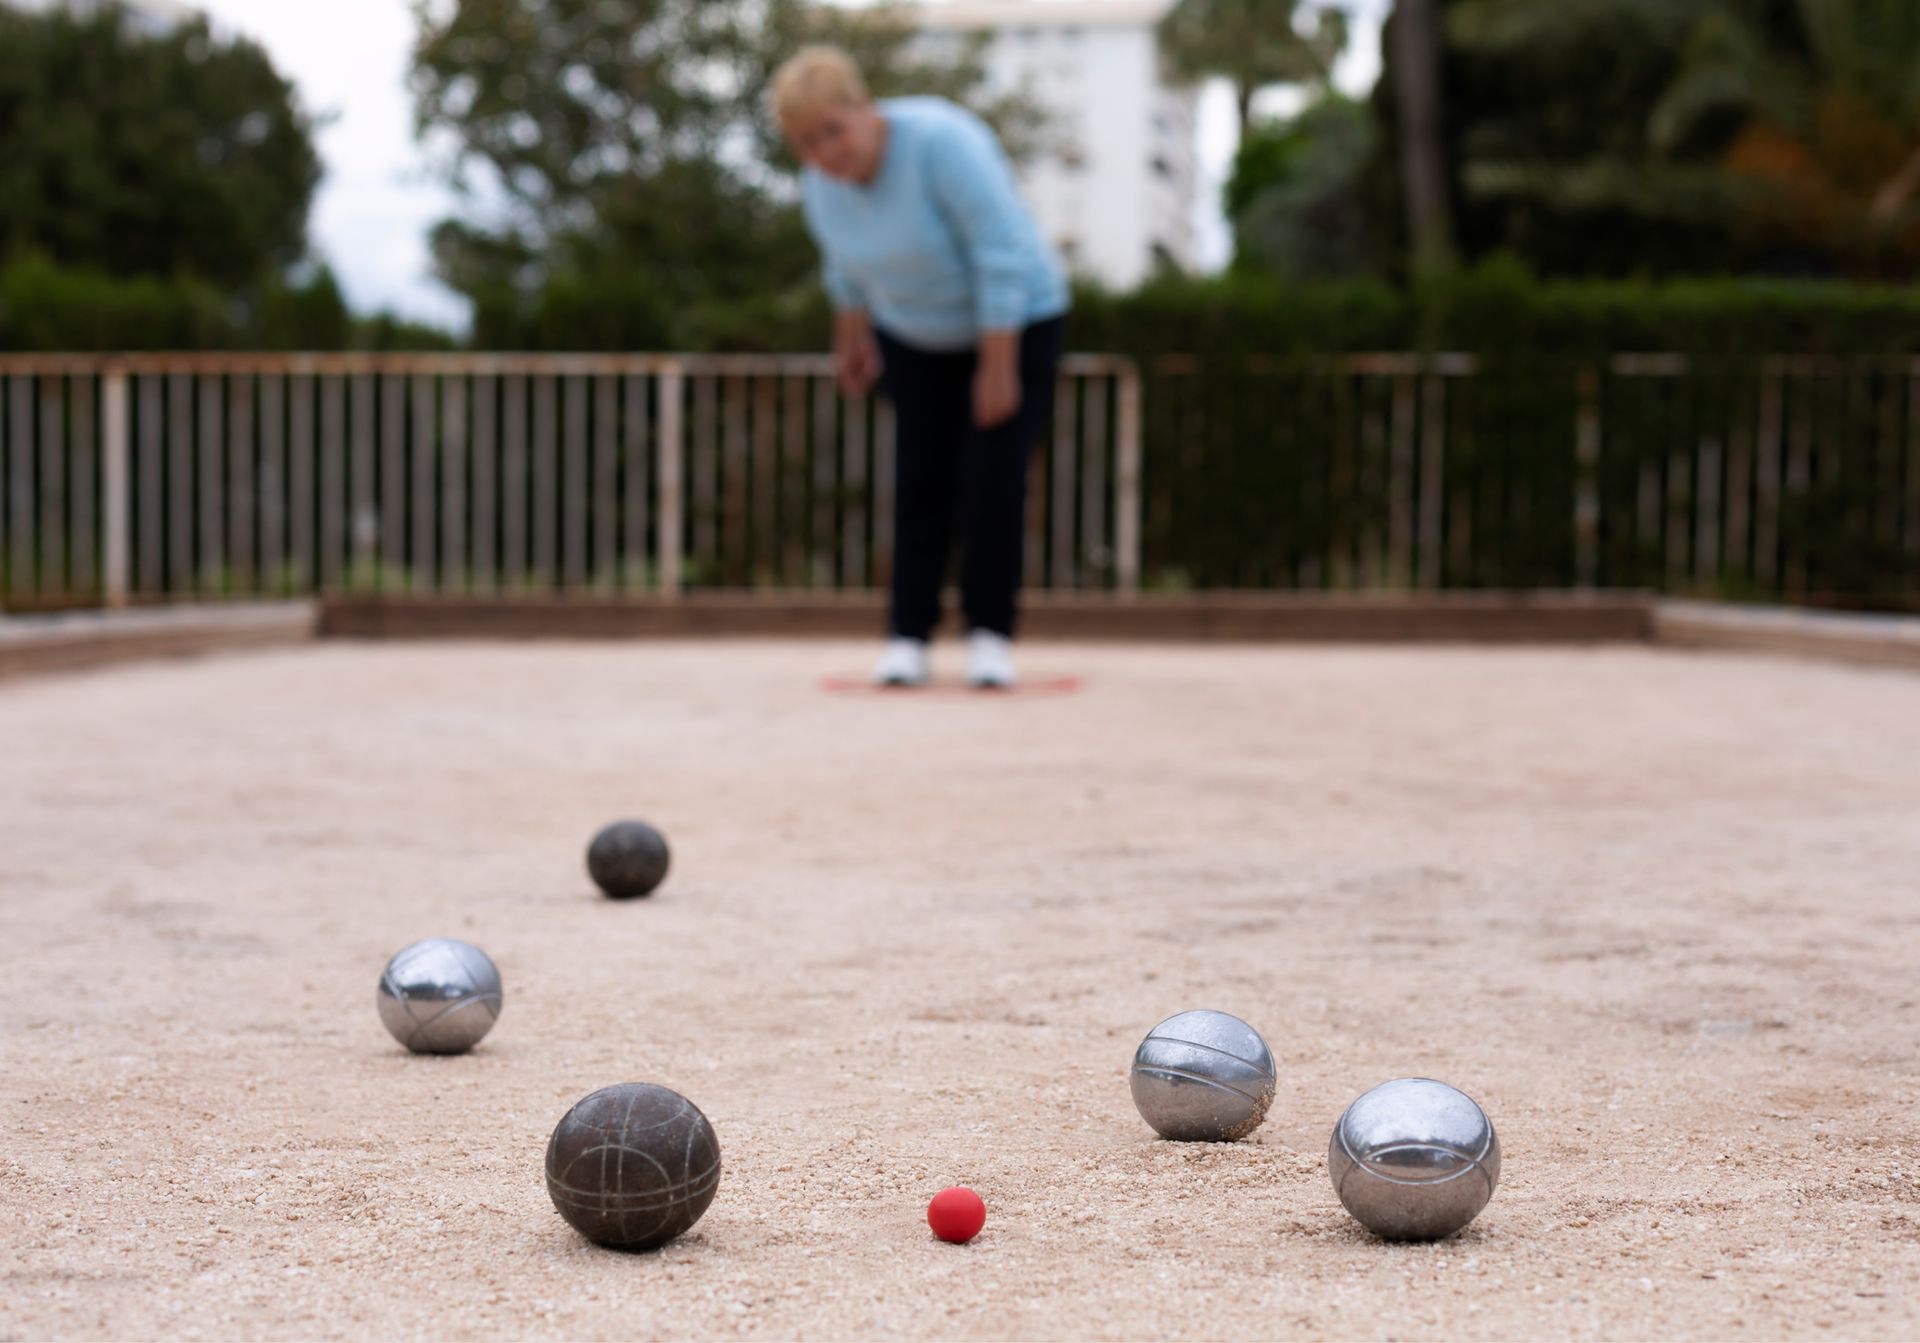 A woman is playing a game of bocce ball.